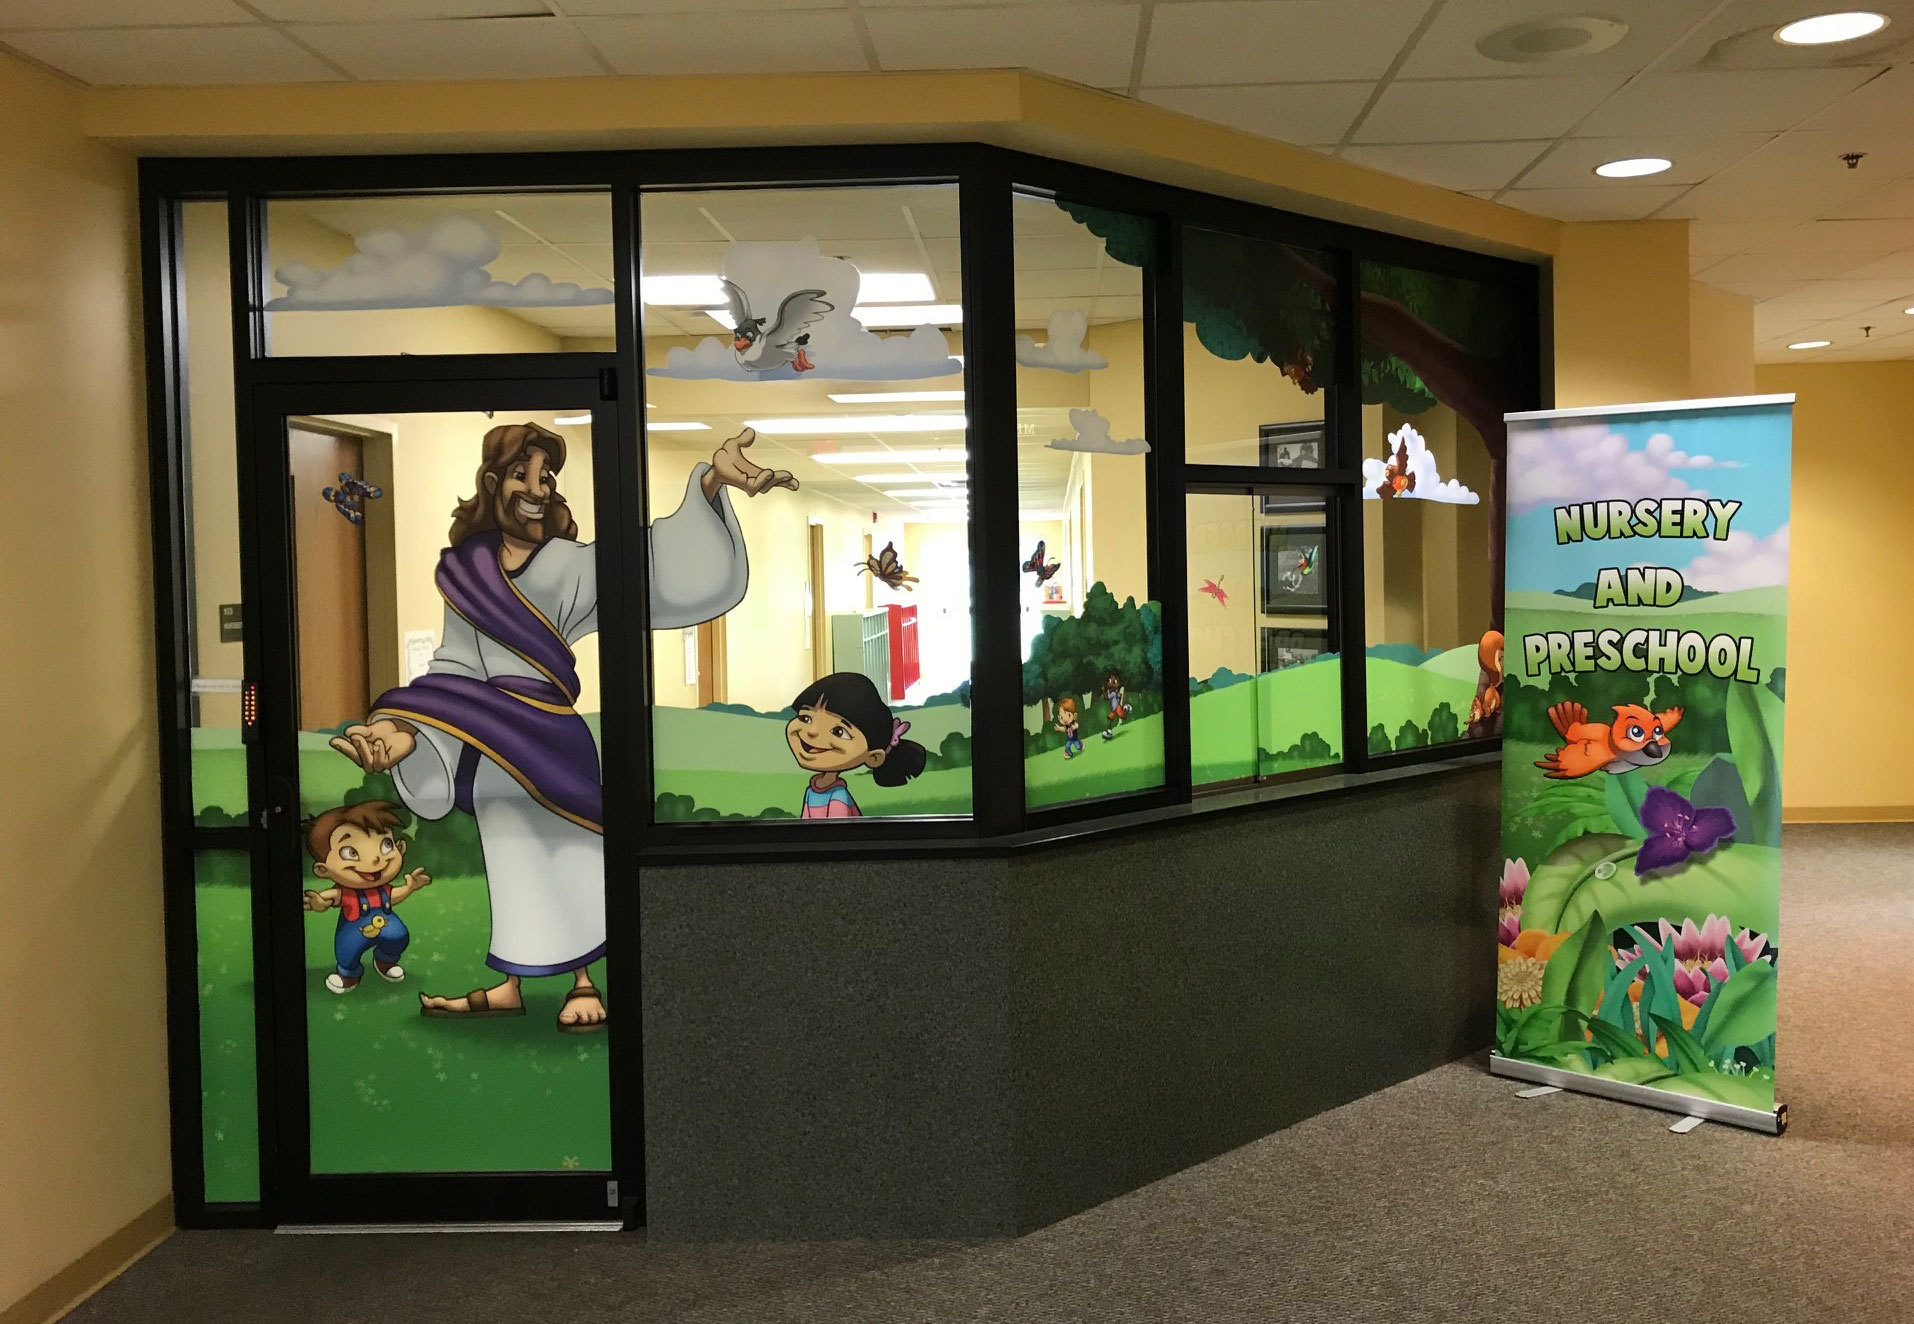 Biblical Window Vinyl depicting Jesus and children in a meadow and Pop Up Banner sign with flowers and bird reading "Nursery and Preschool" at a Church Office